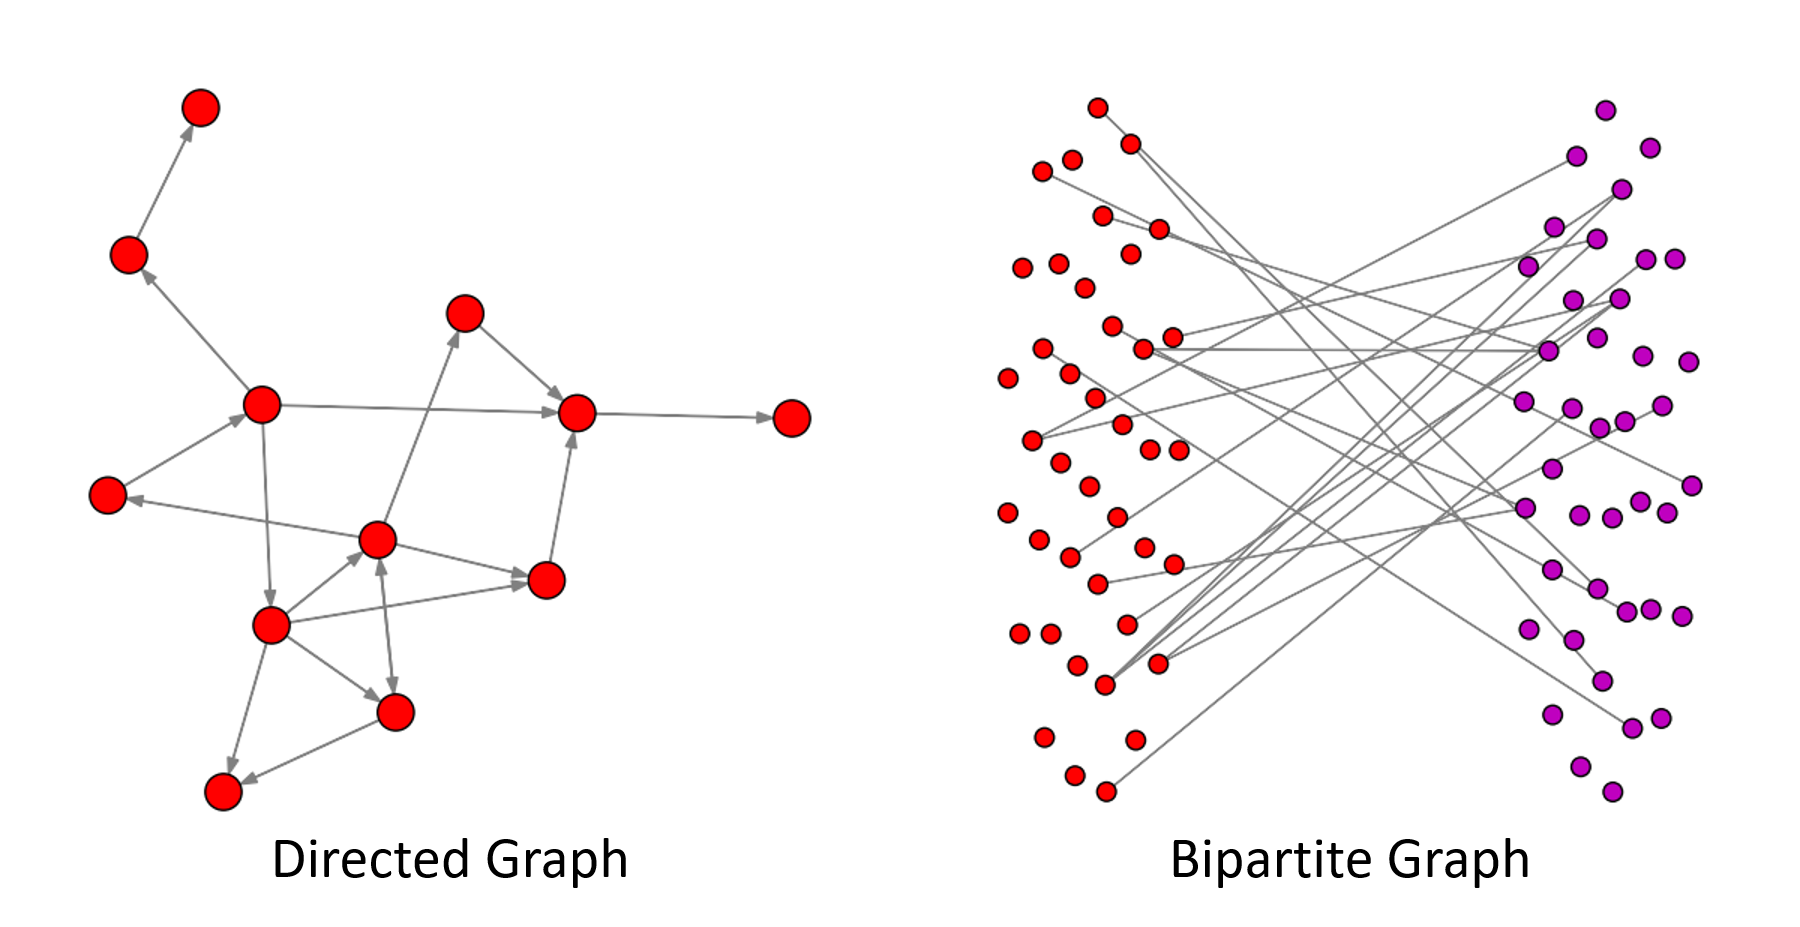 Visualization of directed graph and bipartite graph